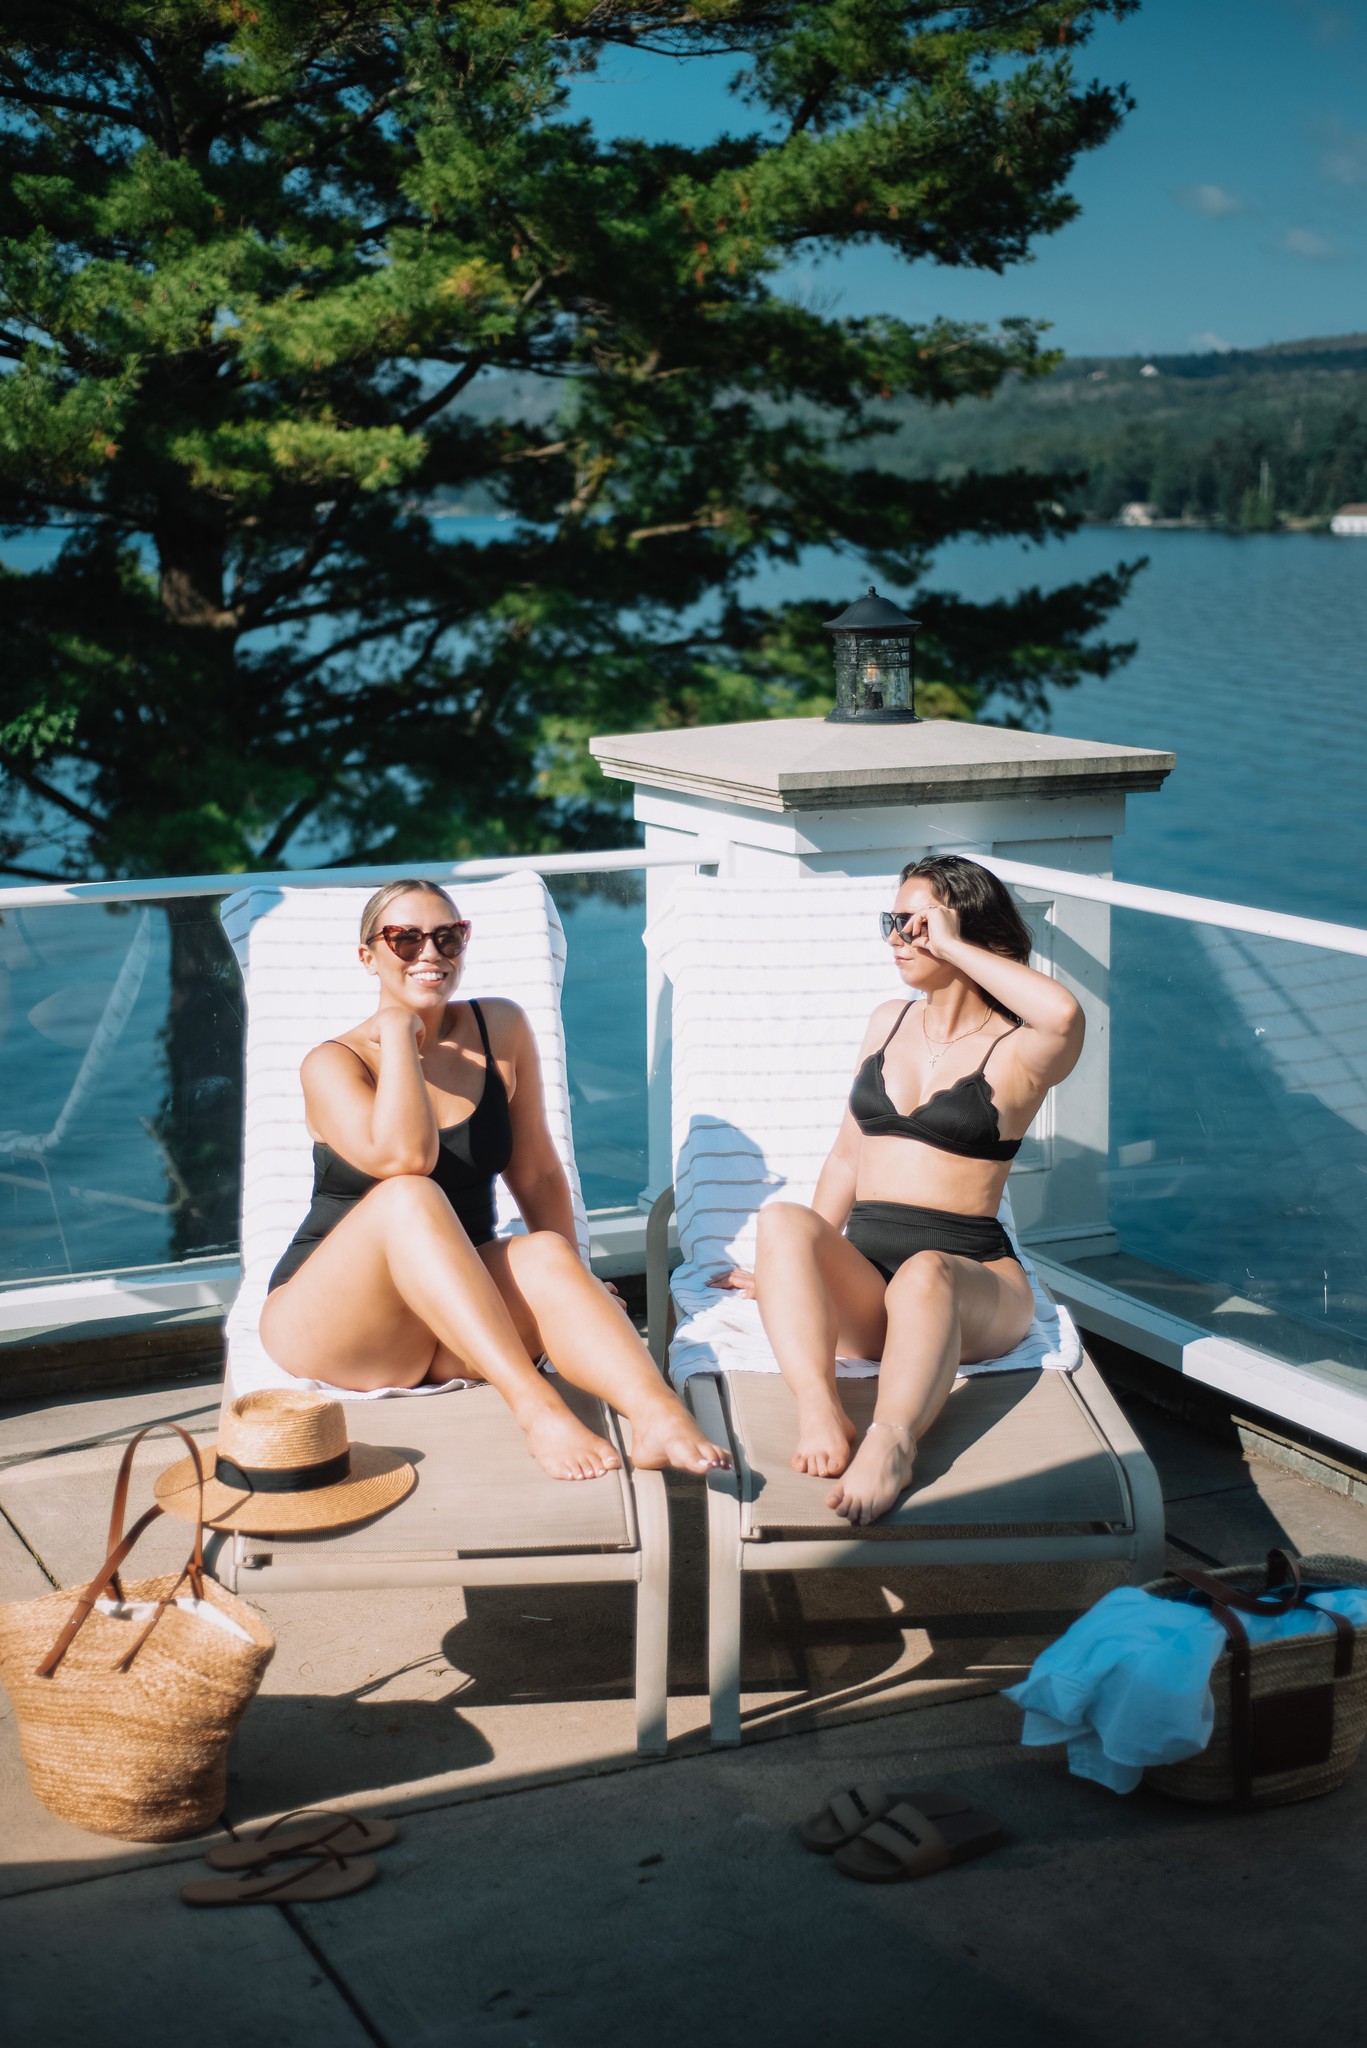 The Best Black Swimsuits of Summer 2021 | Bikini Poses | Black Bathing Suits | Summer Outfits | Vacation Outfit Ideas | Bikini Picture Ideas | Free People Kimono | Swimsuit Coverups | Aerie One Piece | Lake George, NY | The Sagamore Resort | Summer Roadtrip Packing List | Lounge Chair Pose | Poolside